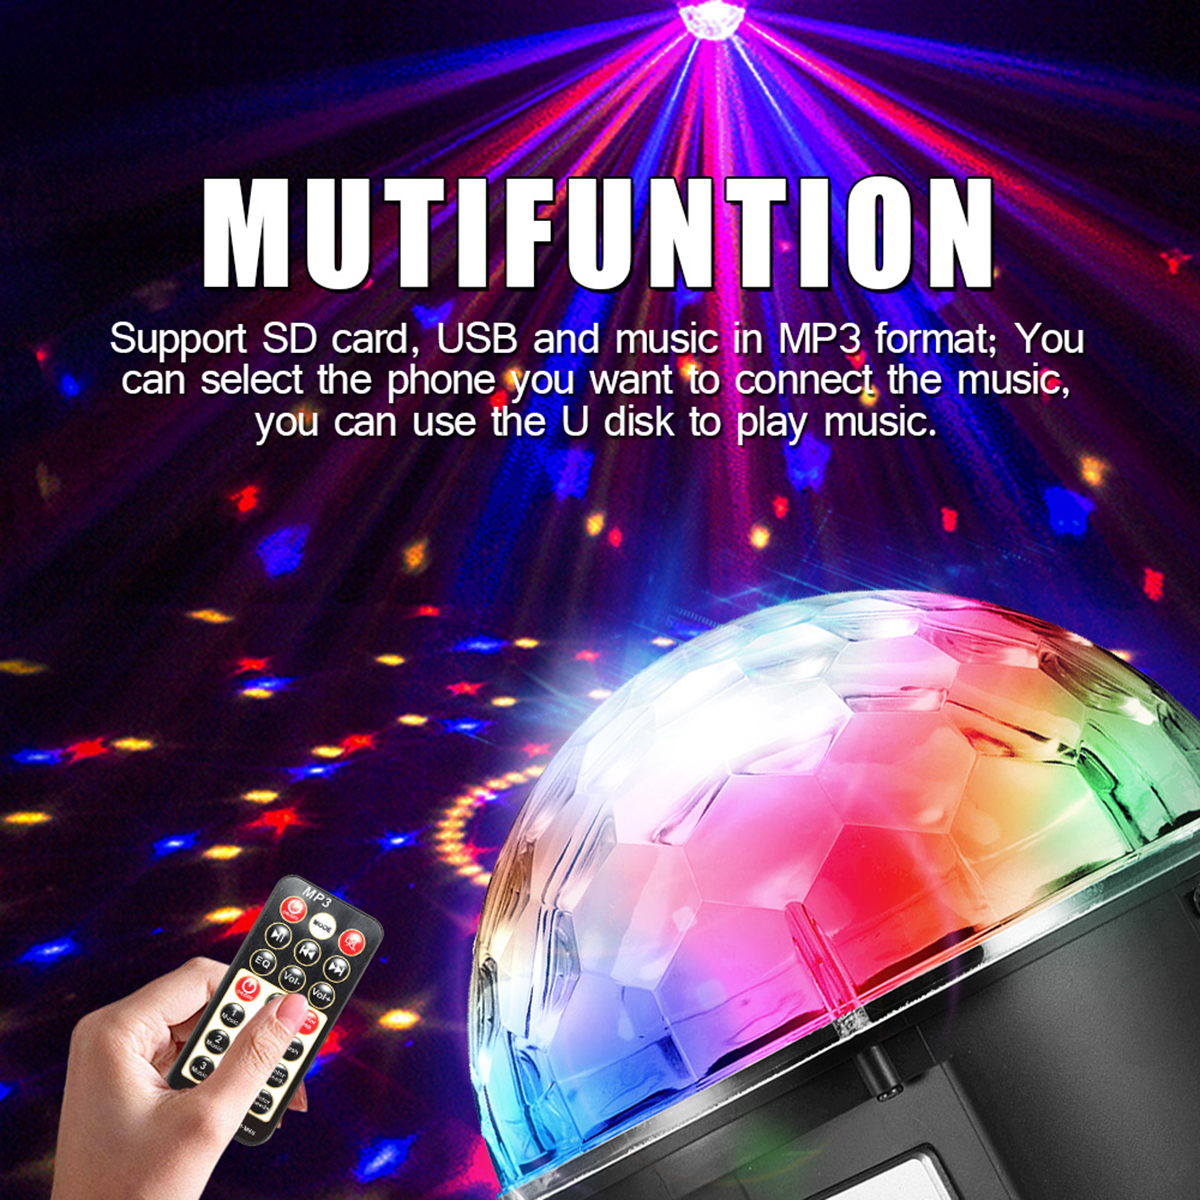 9-Color-LED-Voice-Control-With-Remote-Control-MP3-Crystal-Ball-Flashlightts-Stage-Sprinkle-Lights-1141986-3